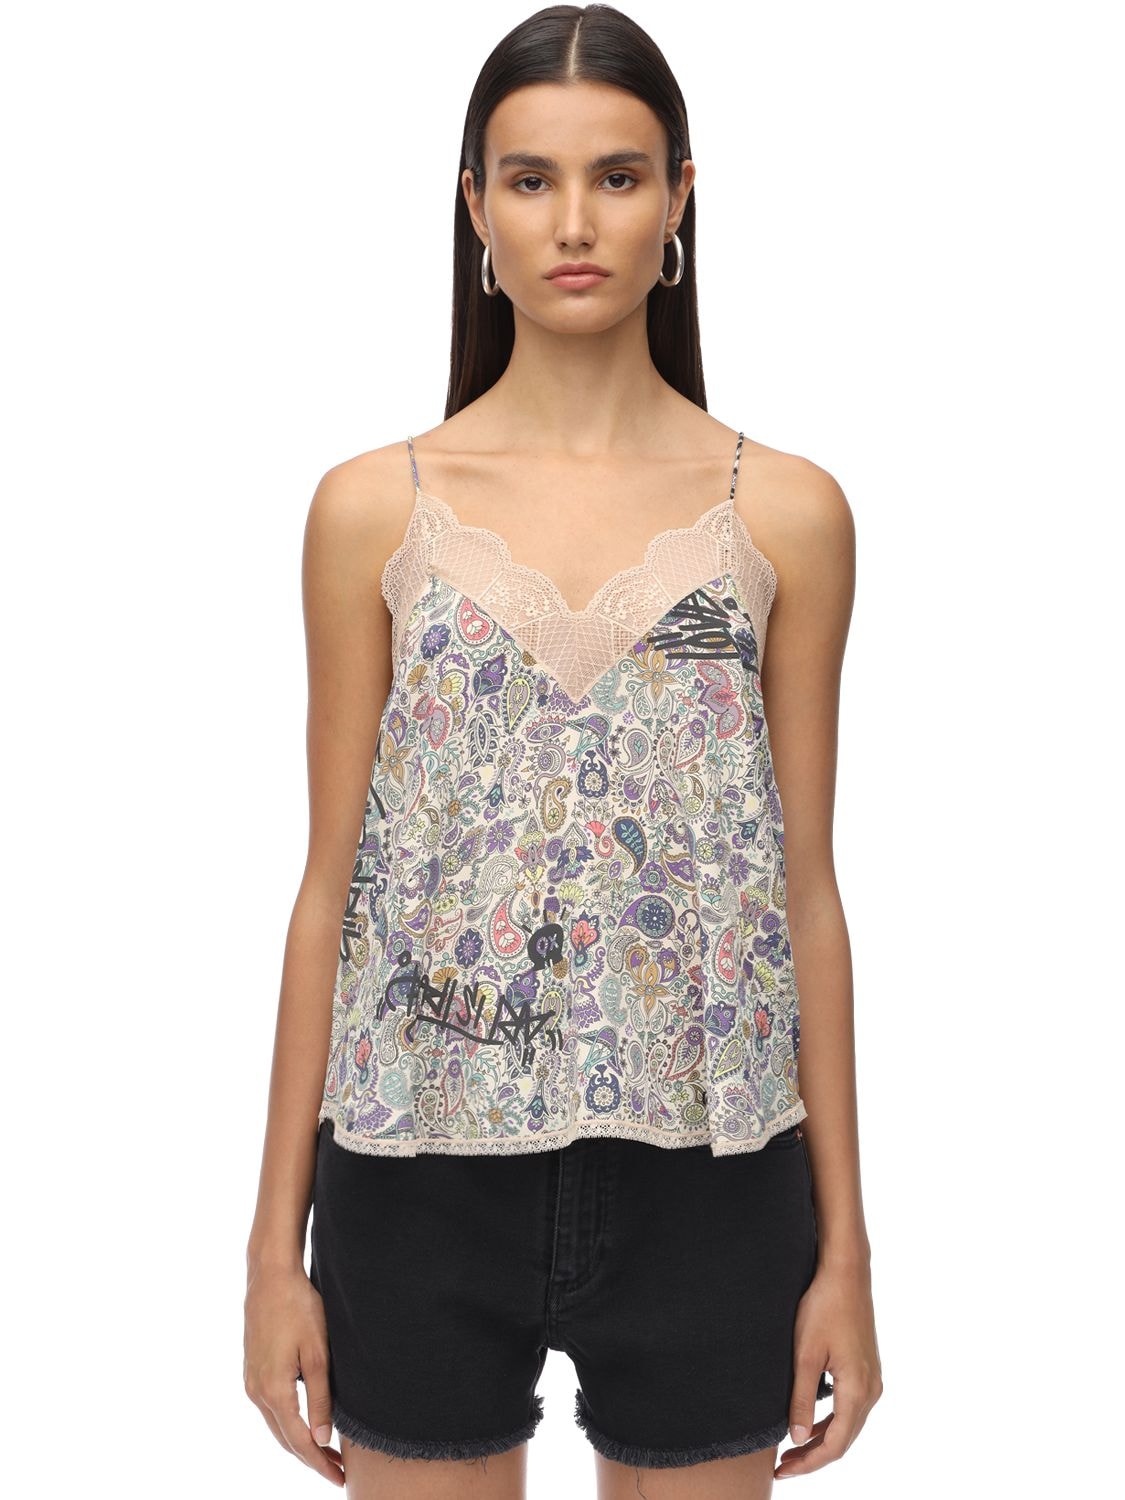 ZADIG & VOLTAIRE LACE & STRETCH MUSLIN CAMISOLE TOP,71I4XT034-RUNSVQ2